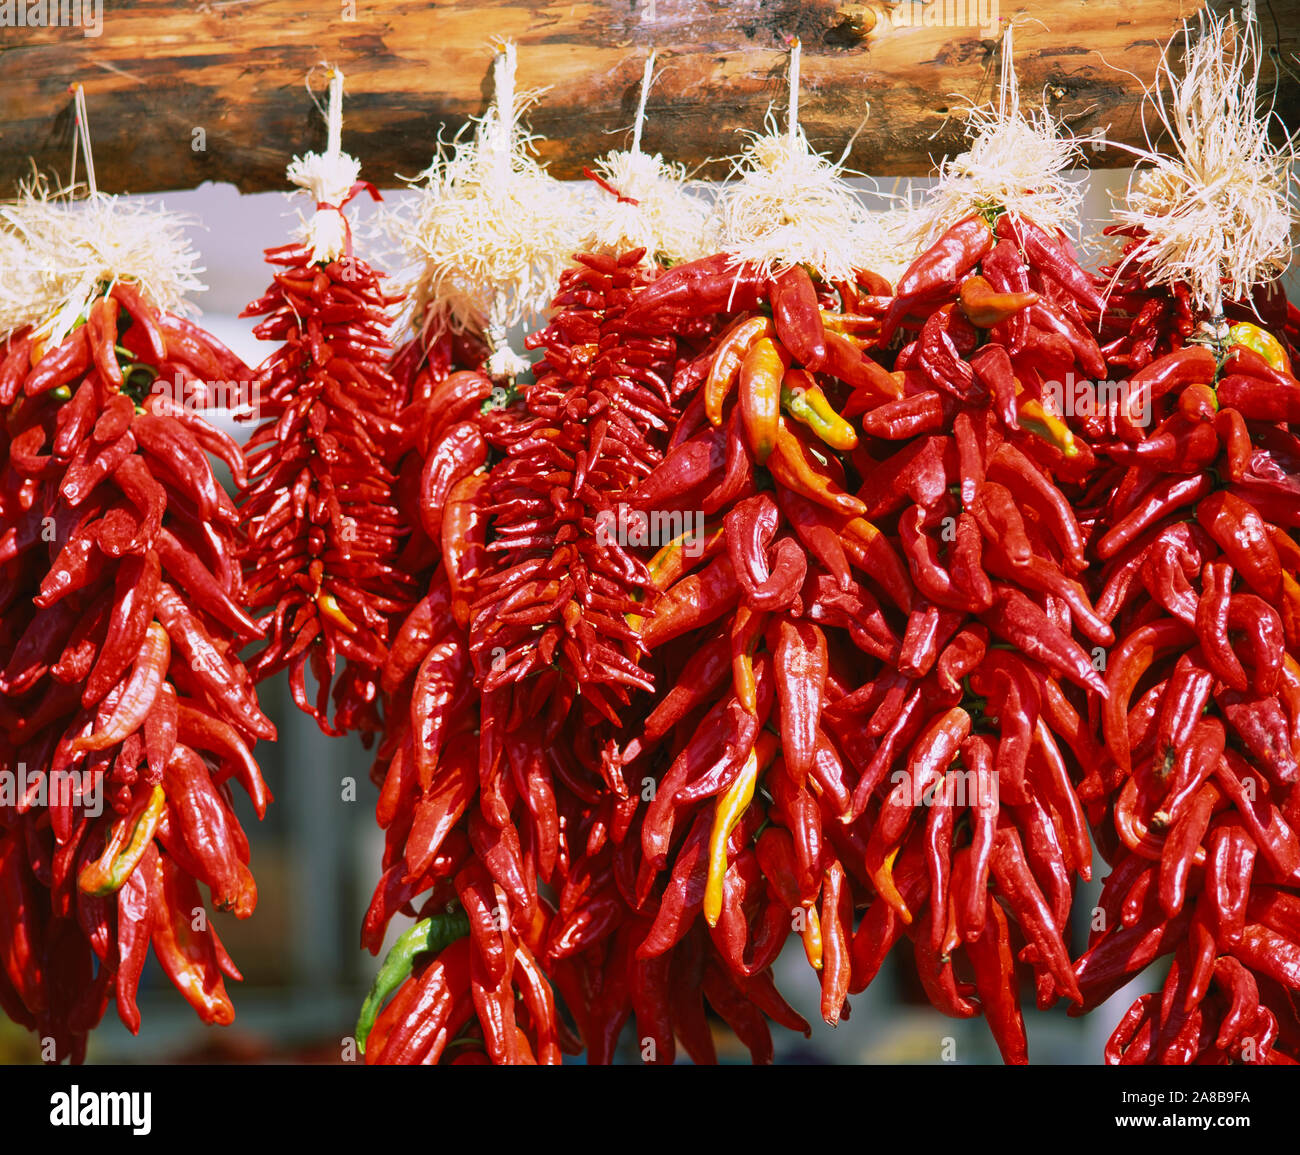 Red Chili Peppers hanging on a log, Taos, Taos County, Nouveau Mexique, USA Banque D'Images